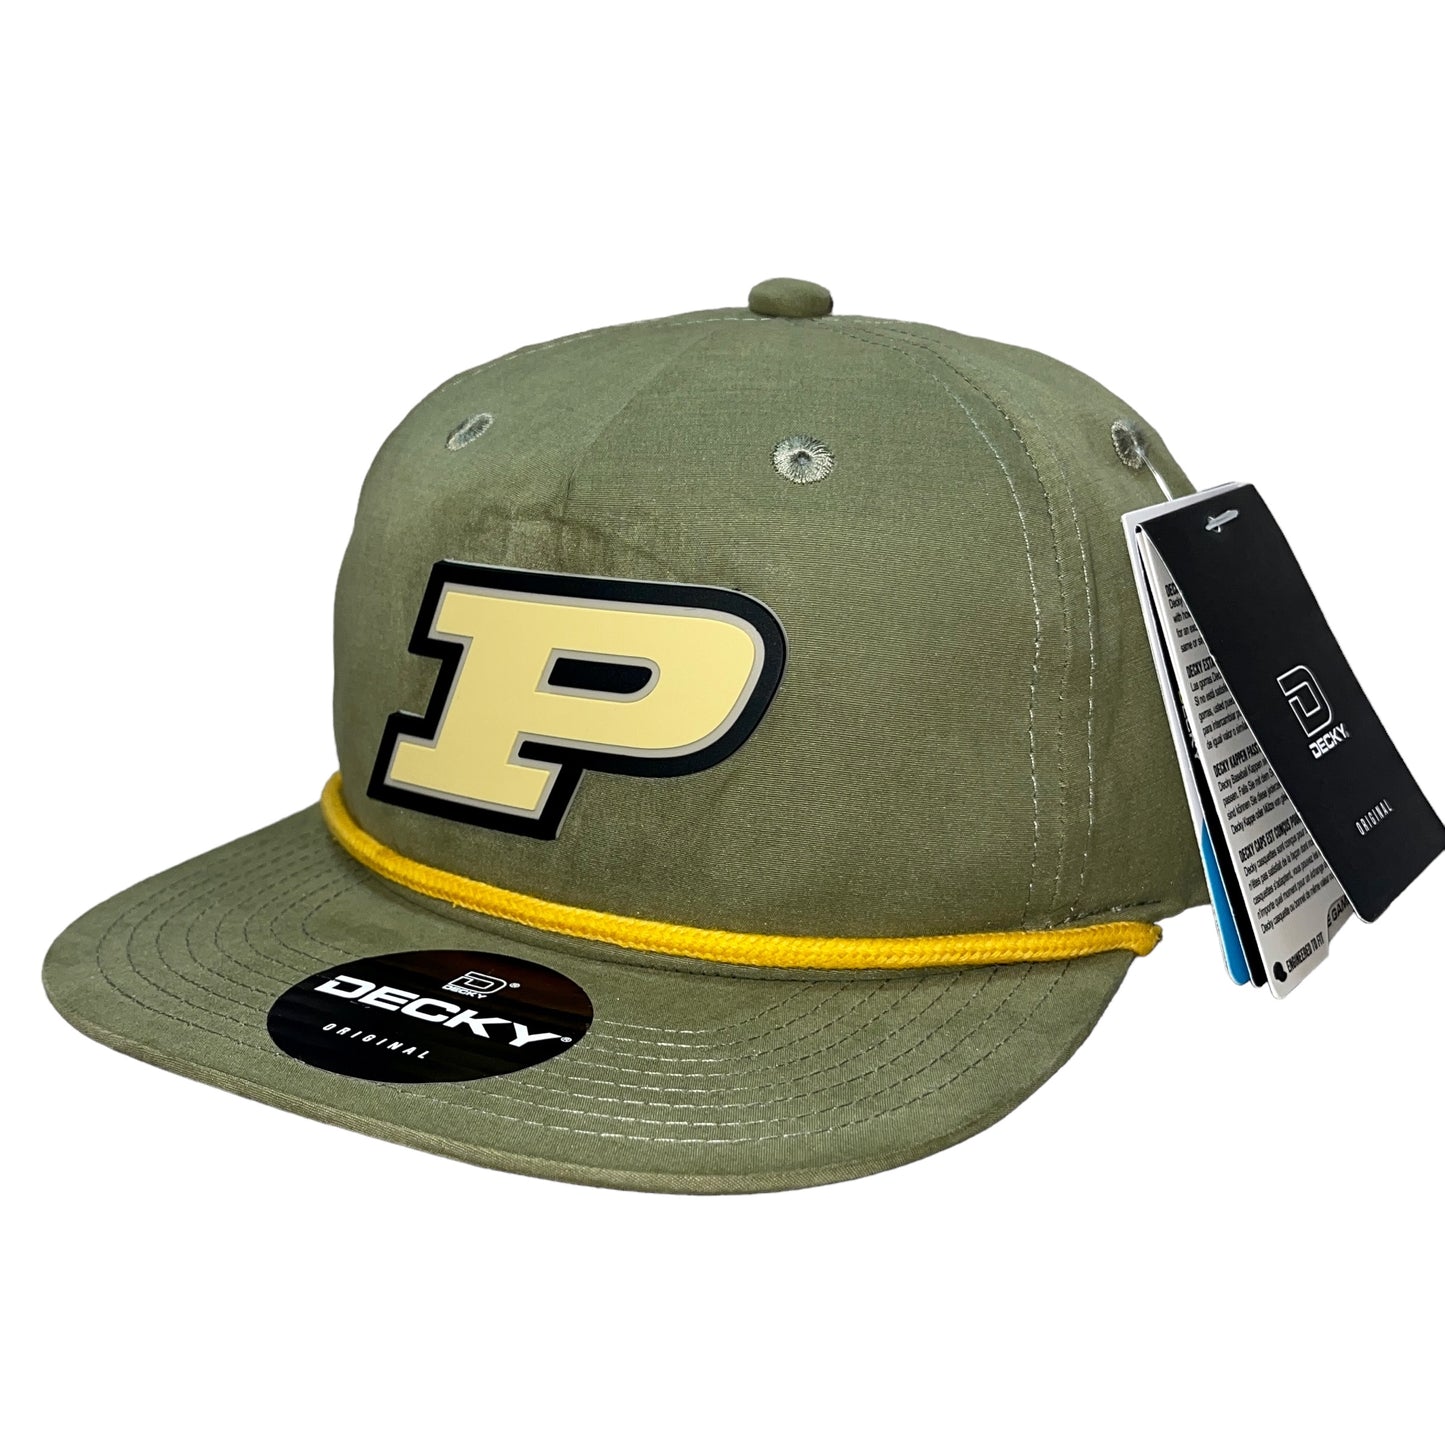 Purdue Boilermakers 3D Classic Rope Hat- Loden/ Amber - Ten Gallon Hat Co.